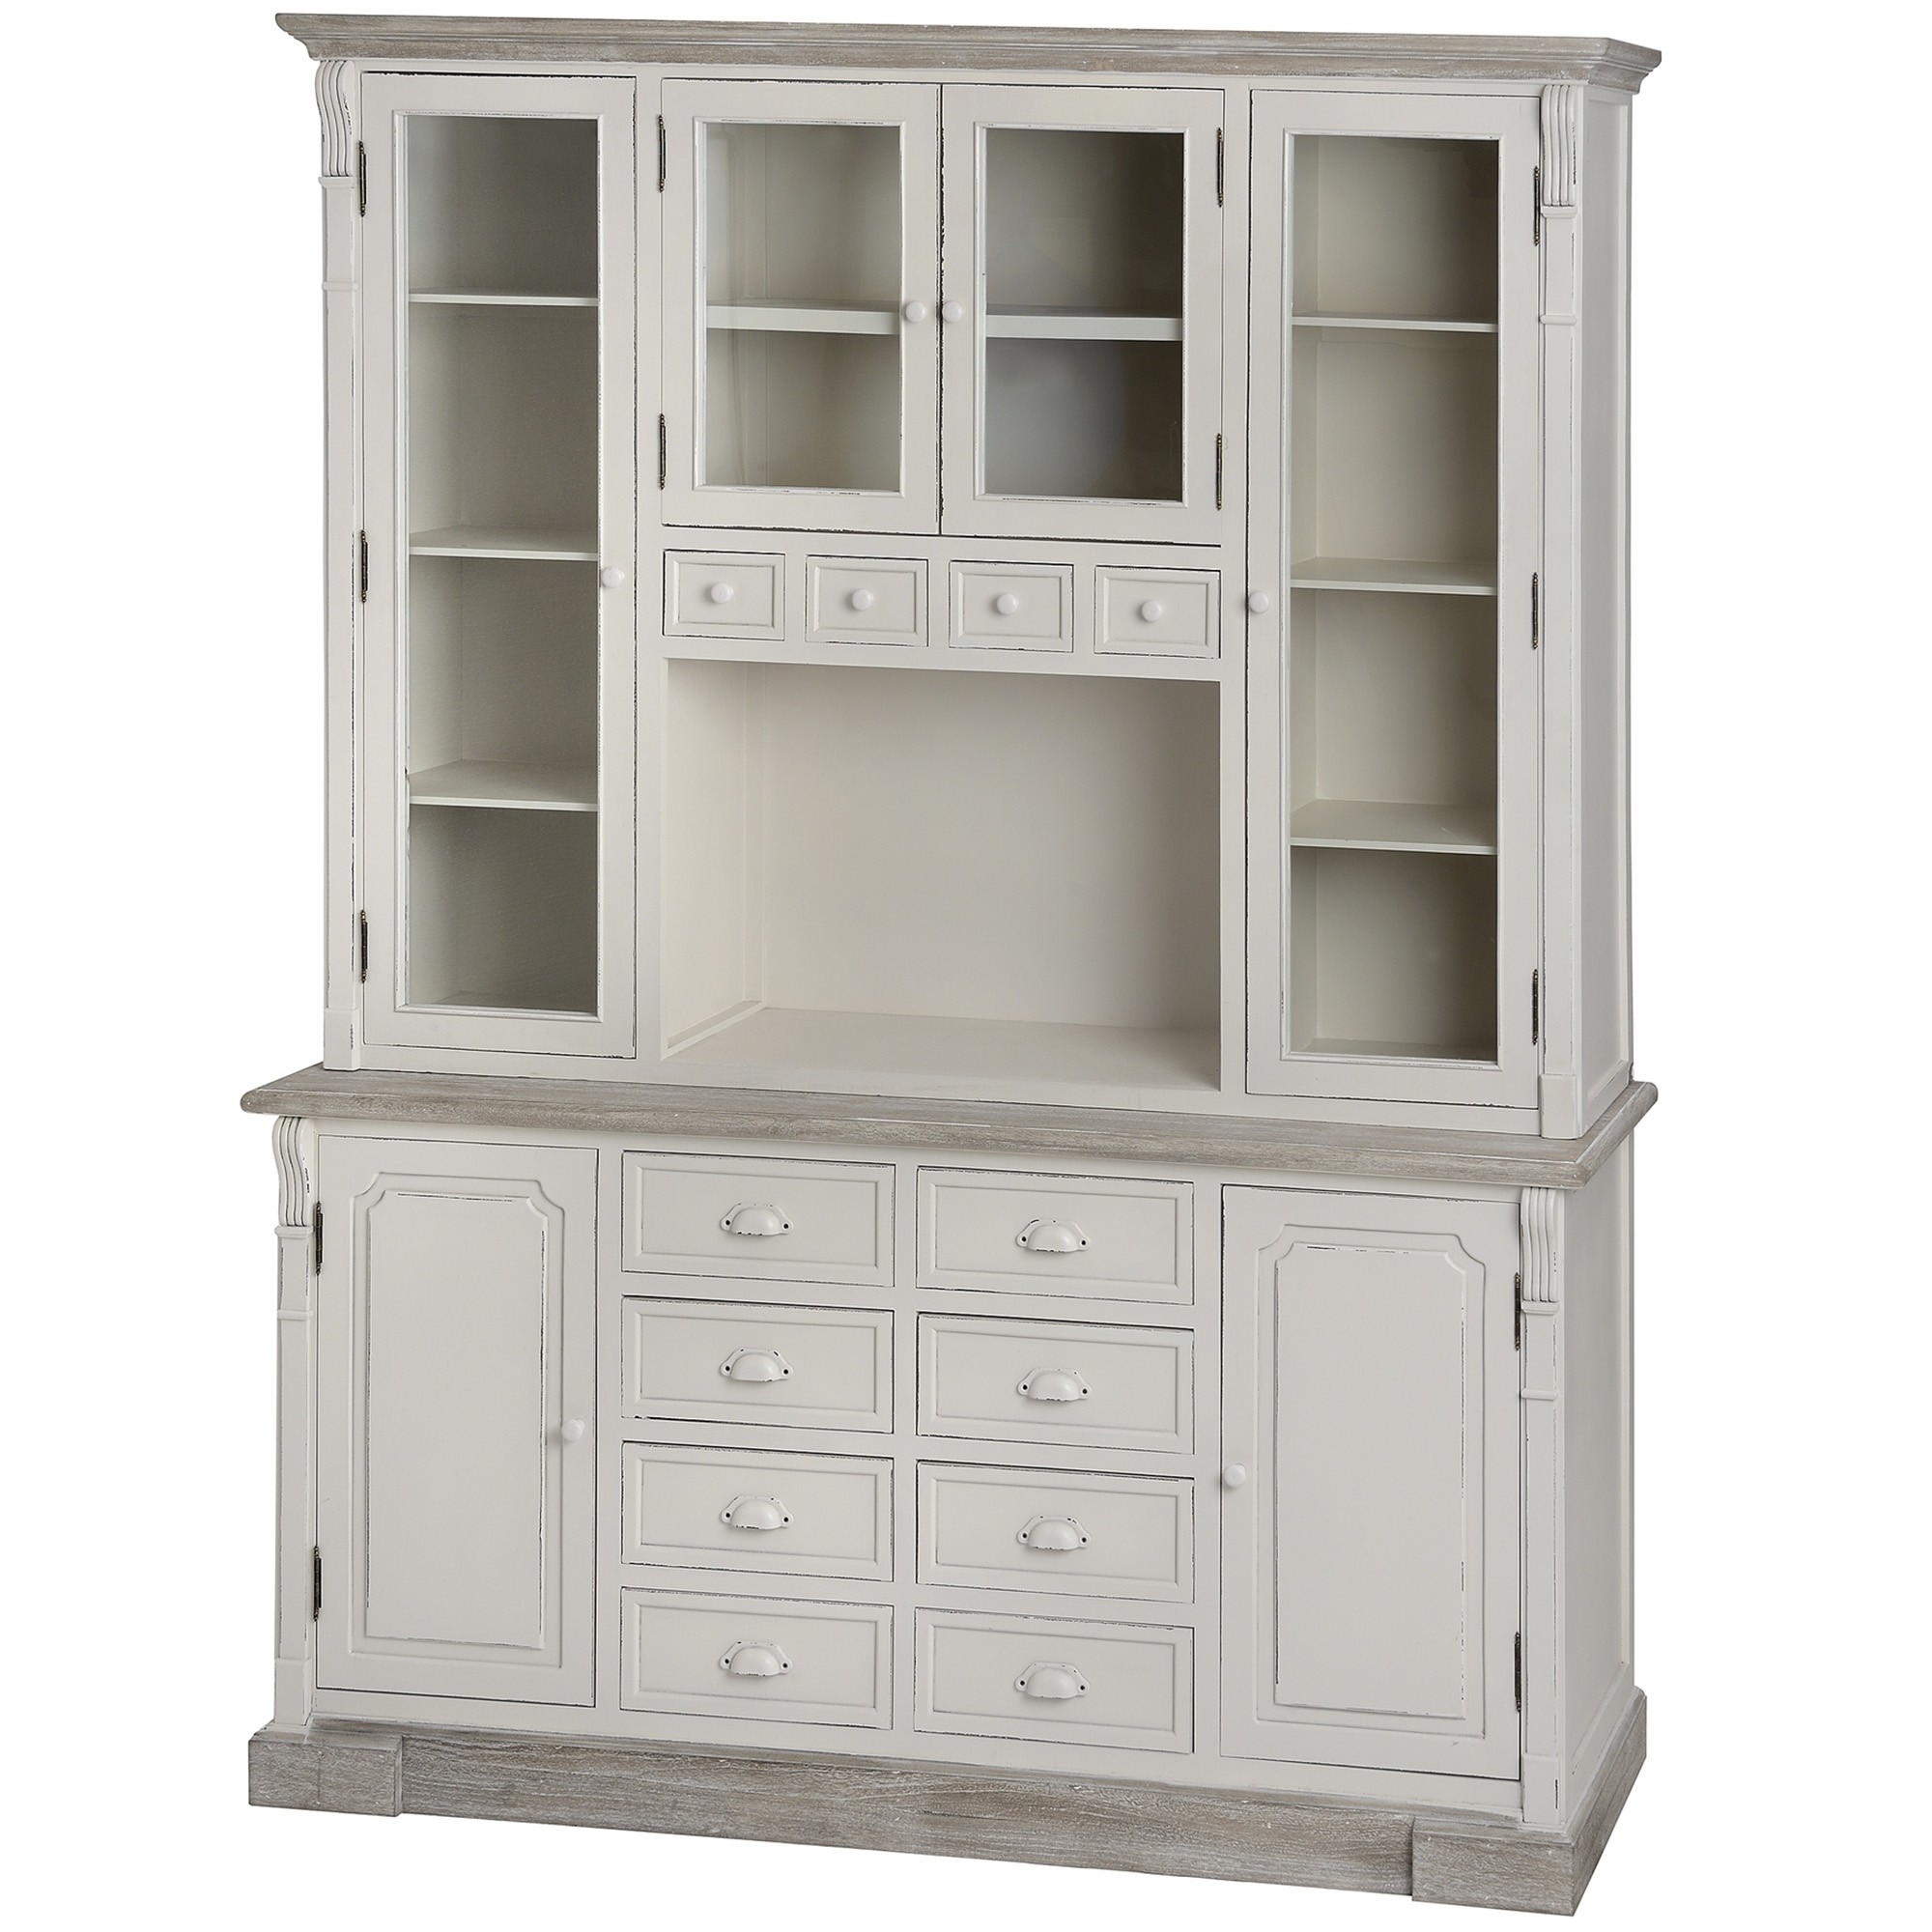 New england shabby chic display cabinet natural wood